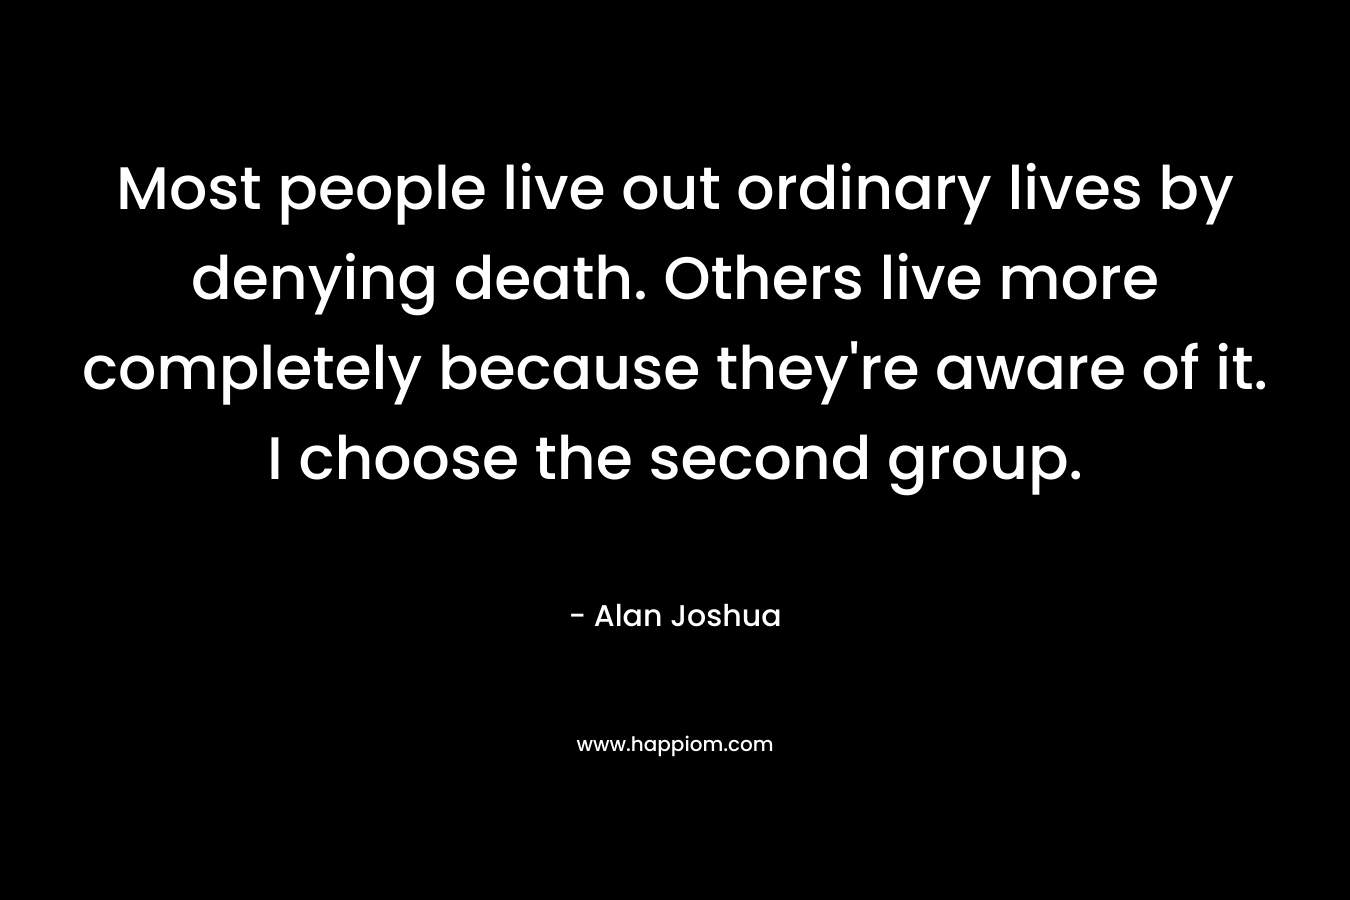 Most people live out ordinary lives by denying death. Others live more completely because they're aware of it. I choose the second group.